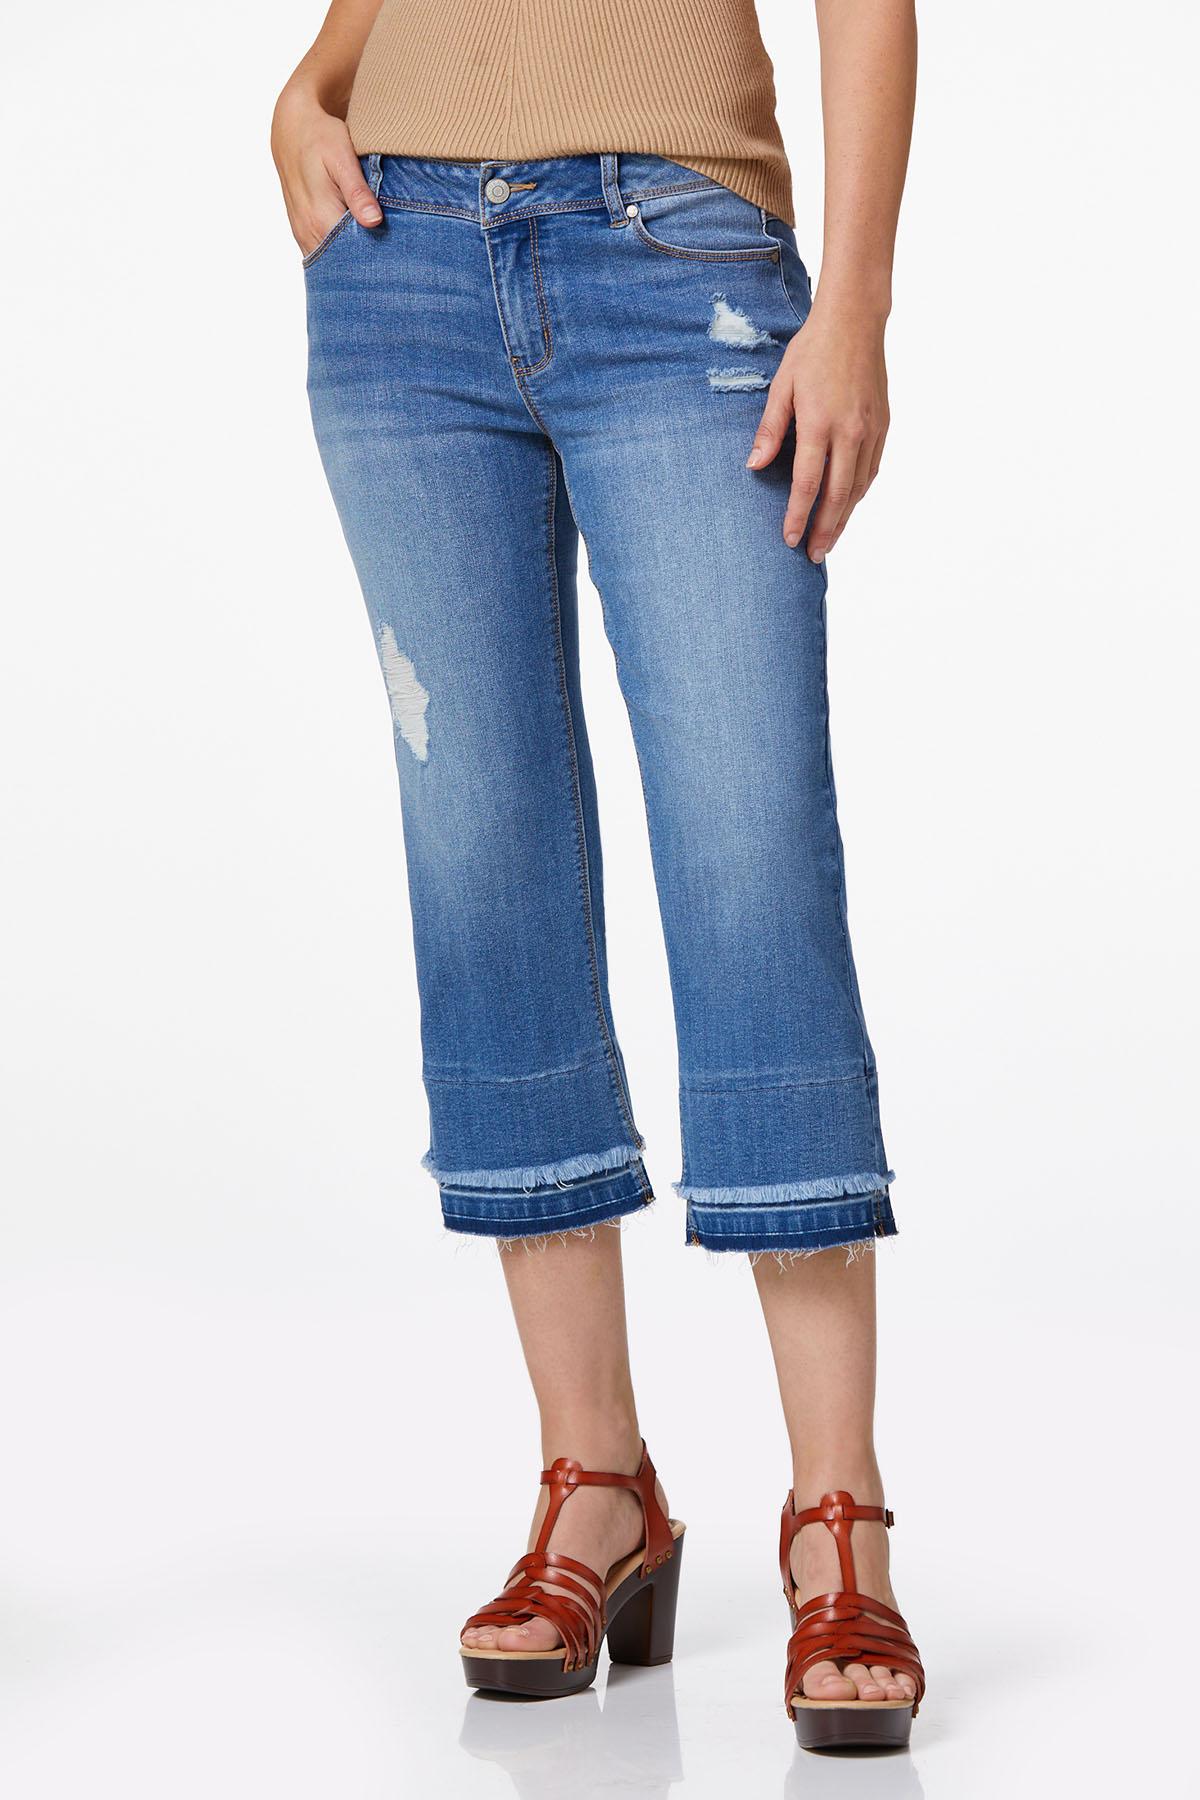 Cato Fashions  Cato Cropped Layered Frayed Jeans